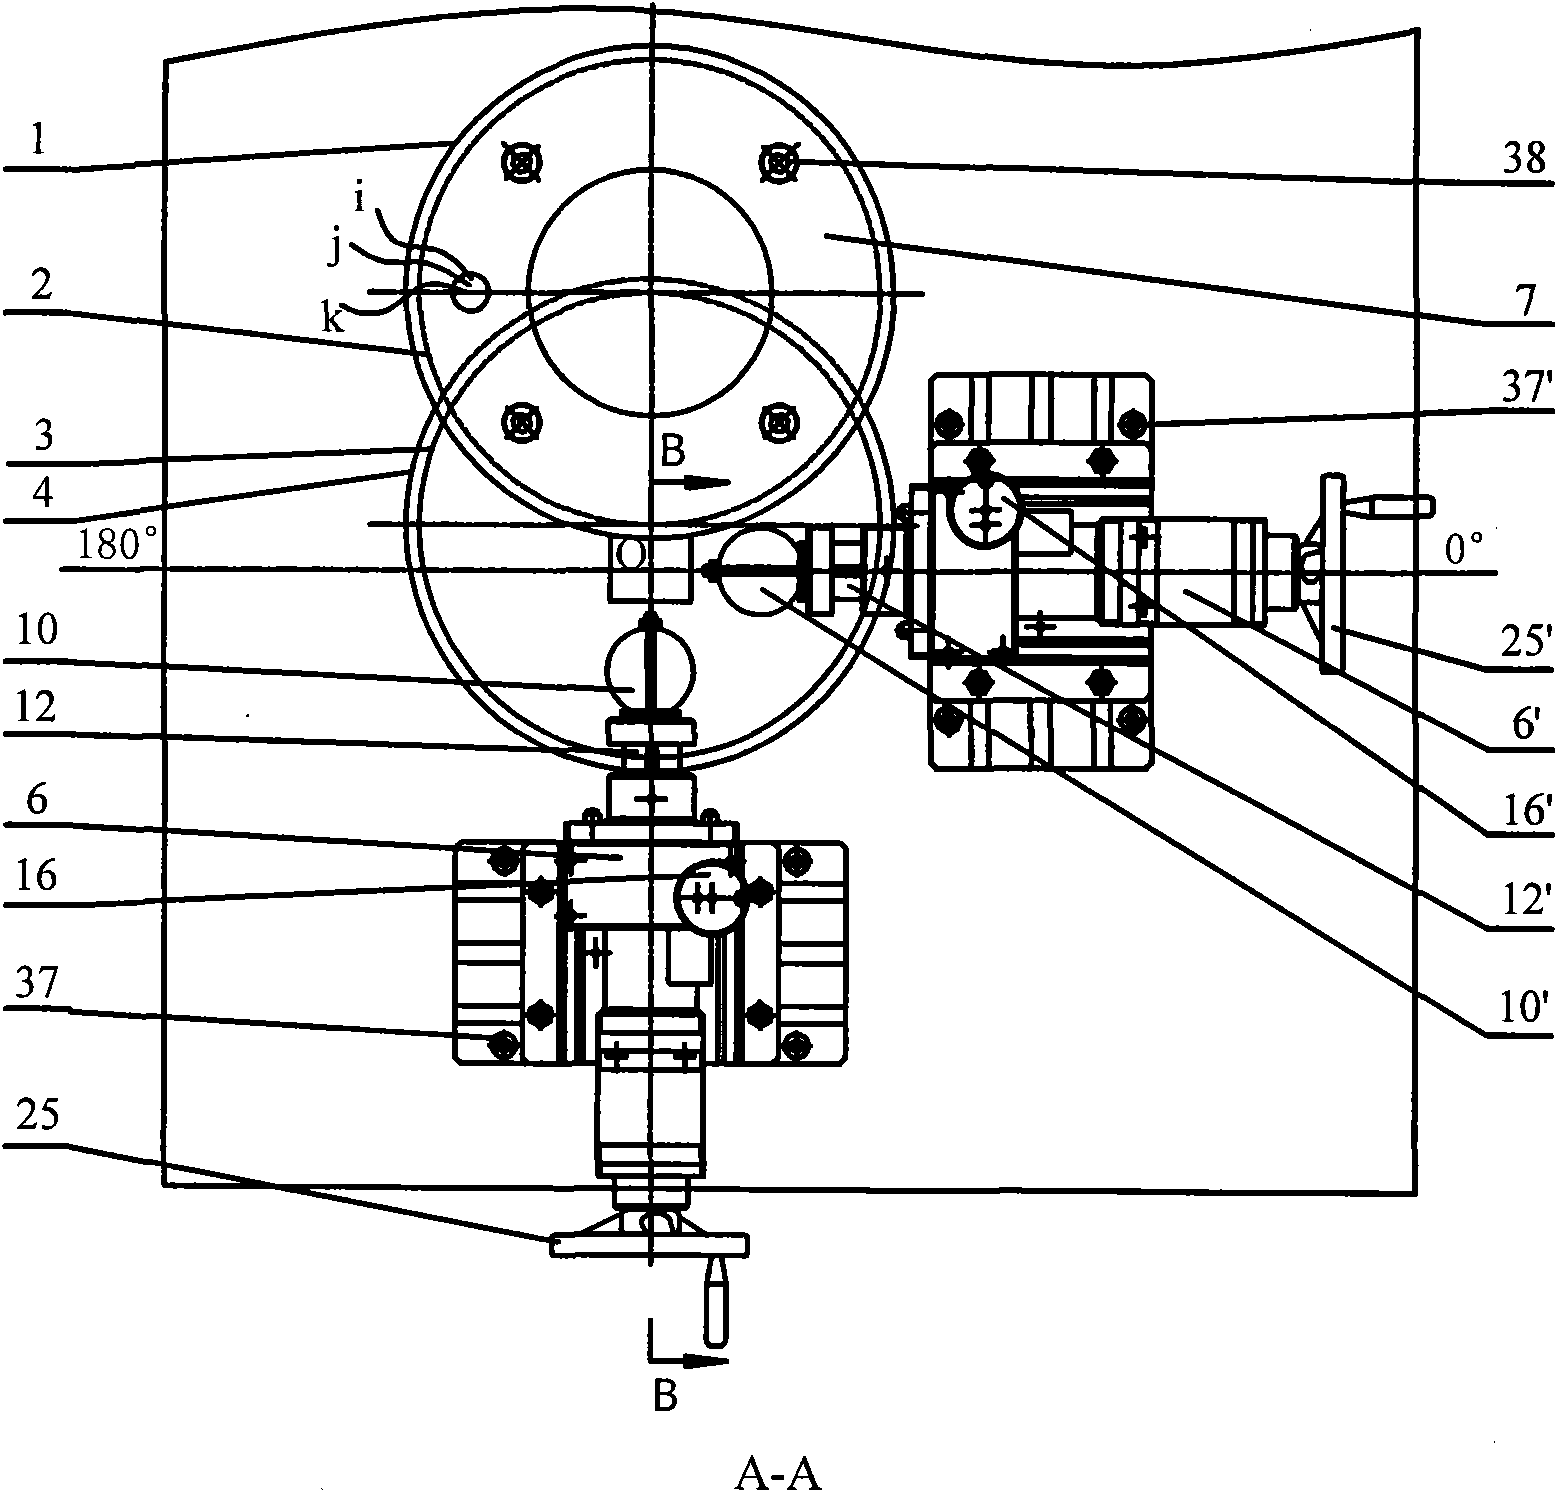 On-machine calibration method for grinding dynamometer and horizontal force loader